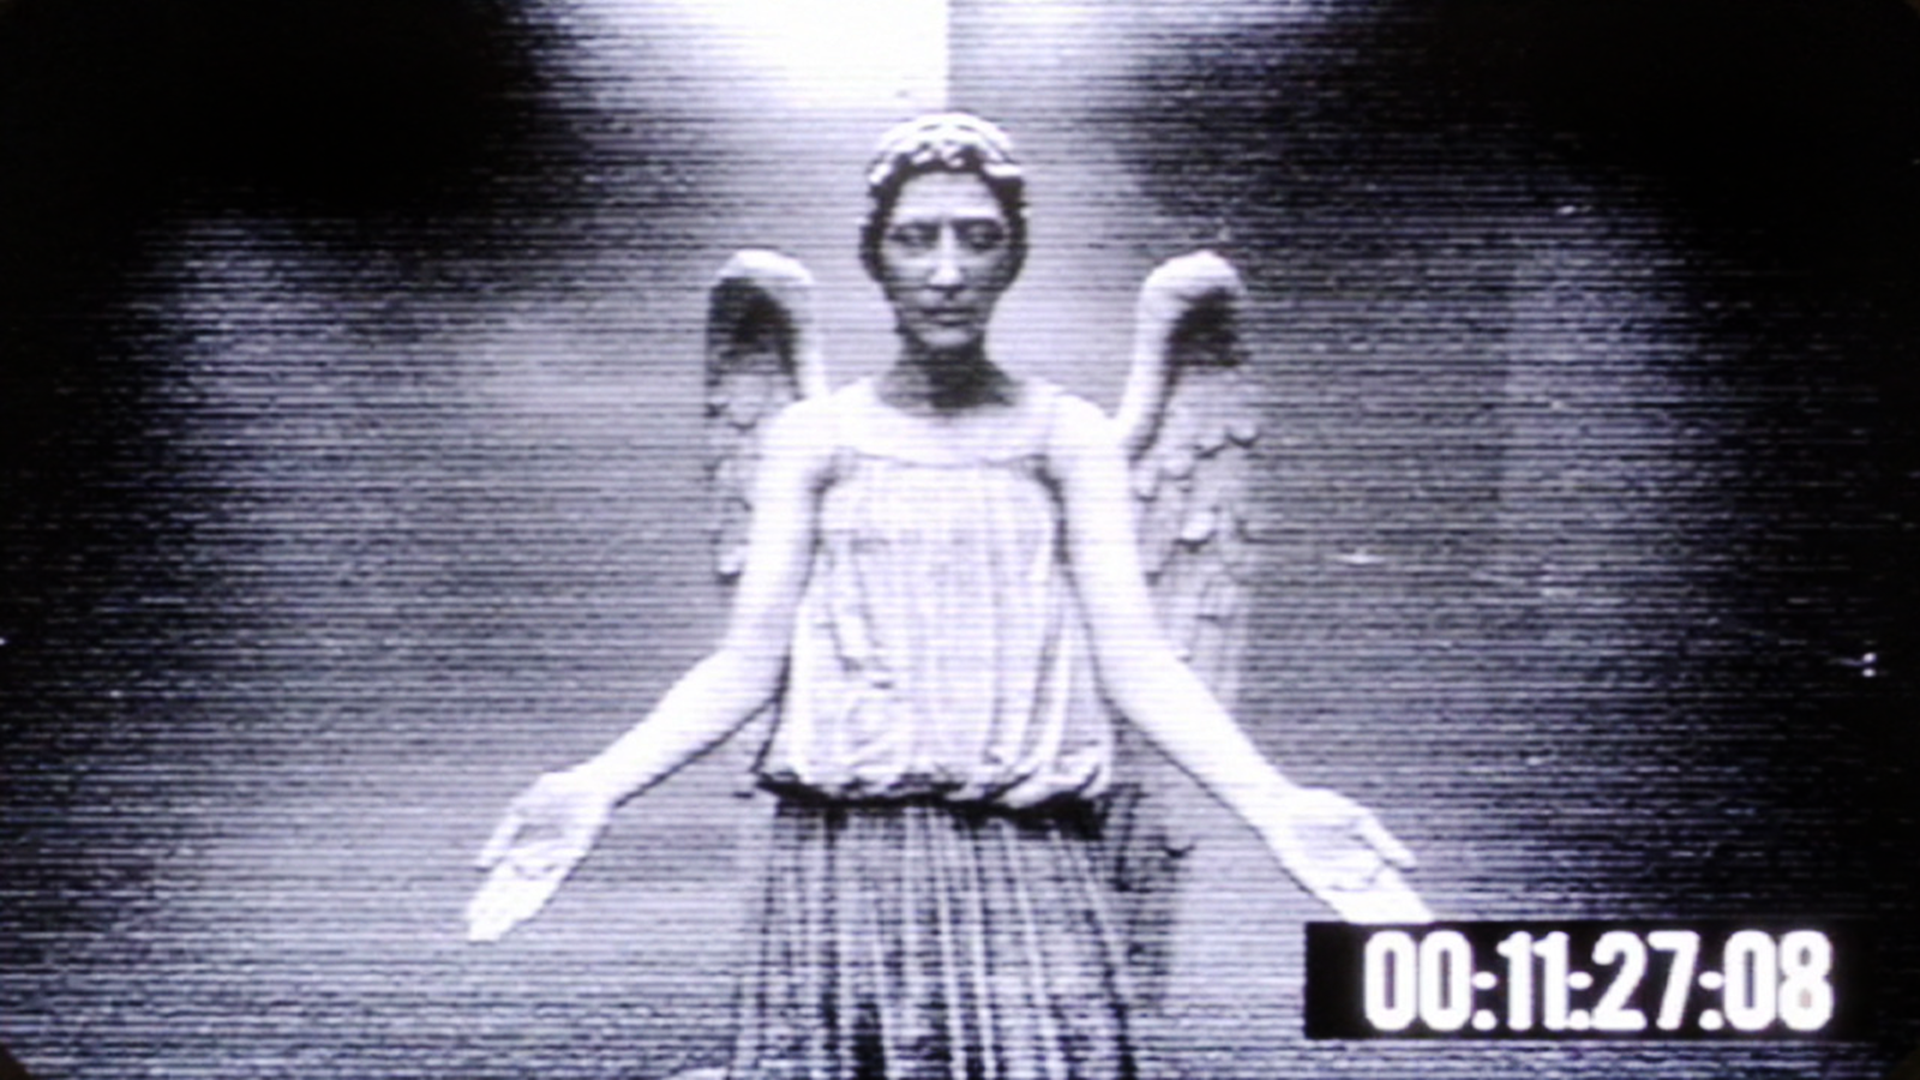 Weeping Angels Gif Wallpaper Set It To Change Every